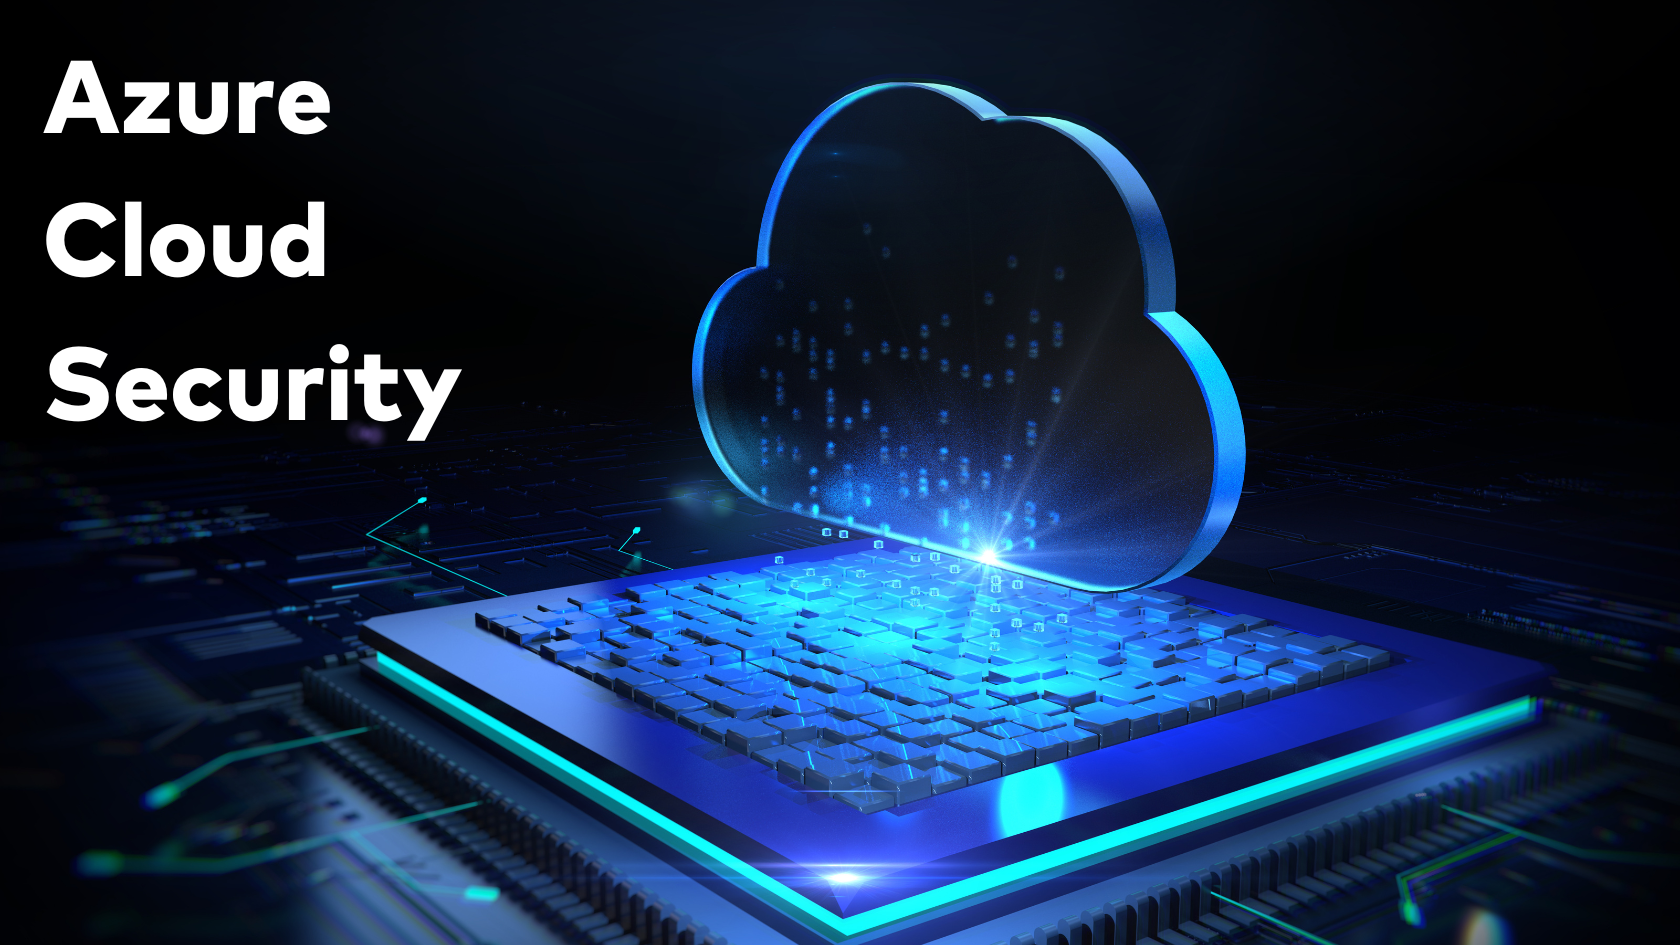 Azure Cloud Security: Benefits And Best Practices